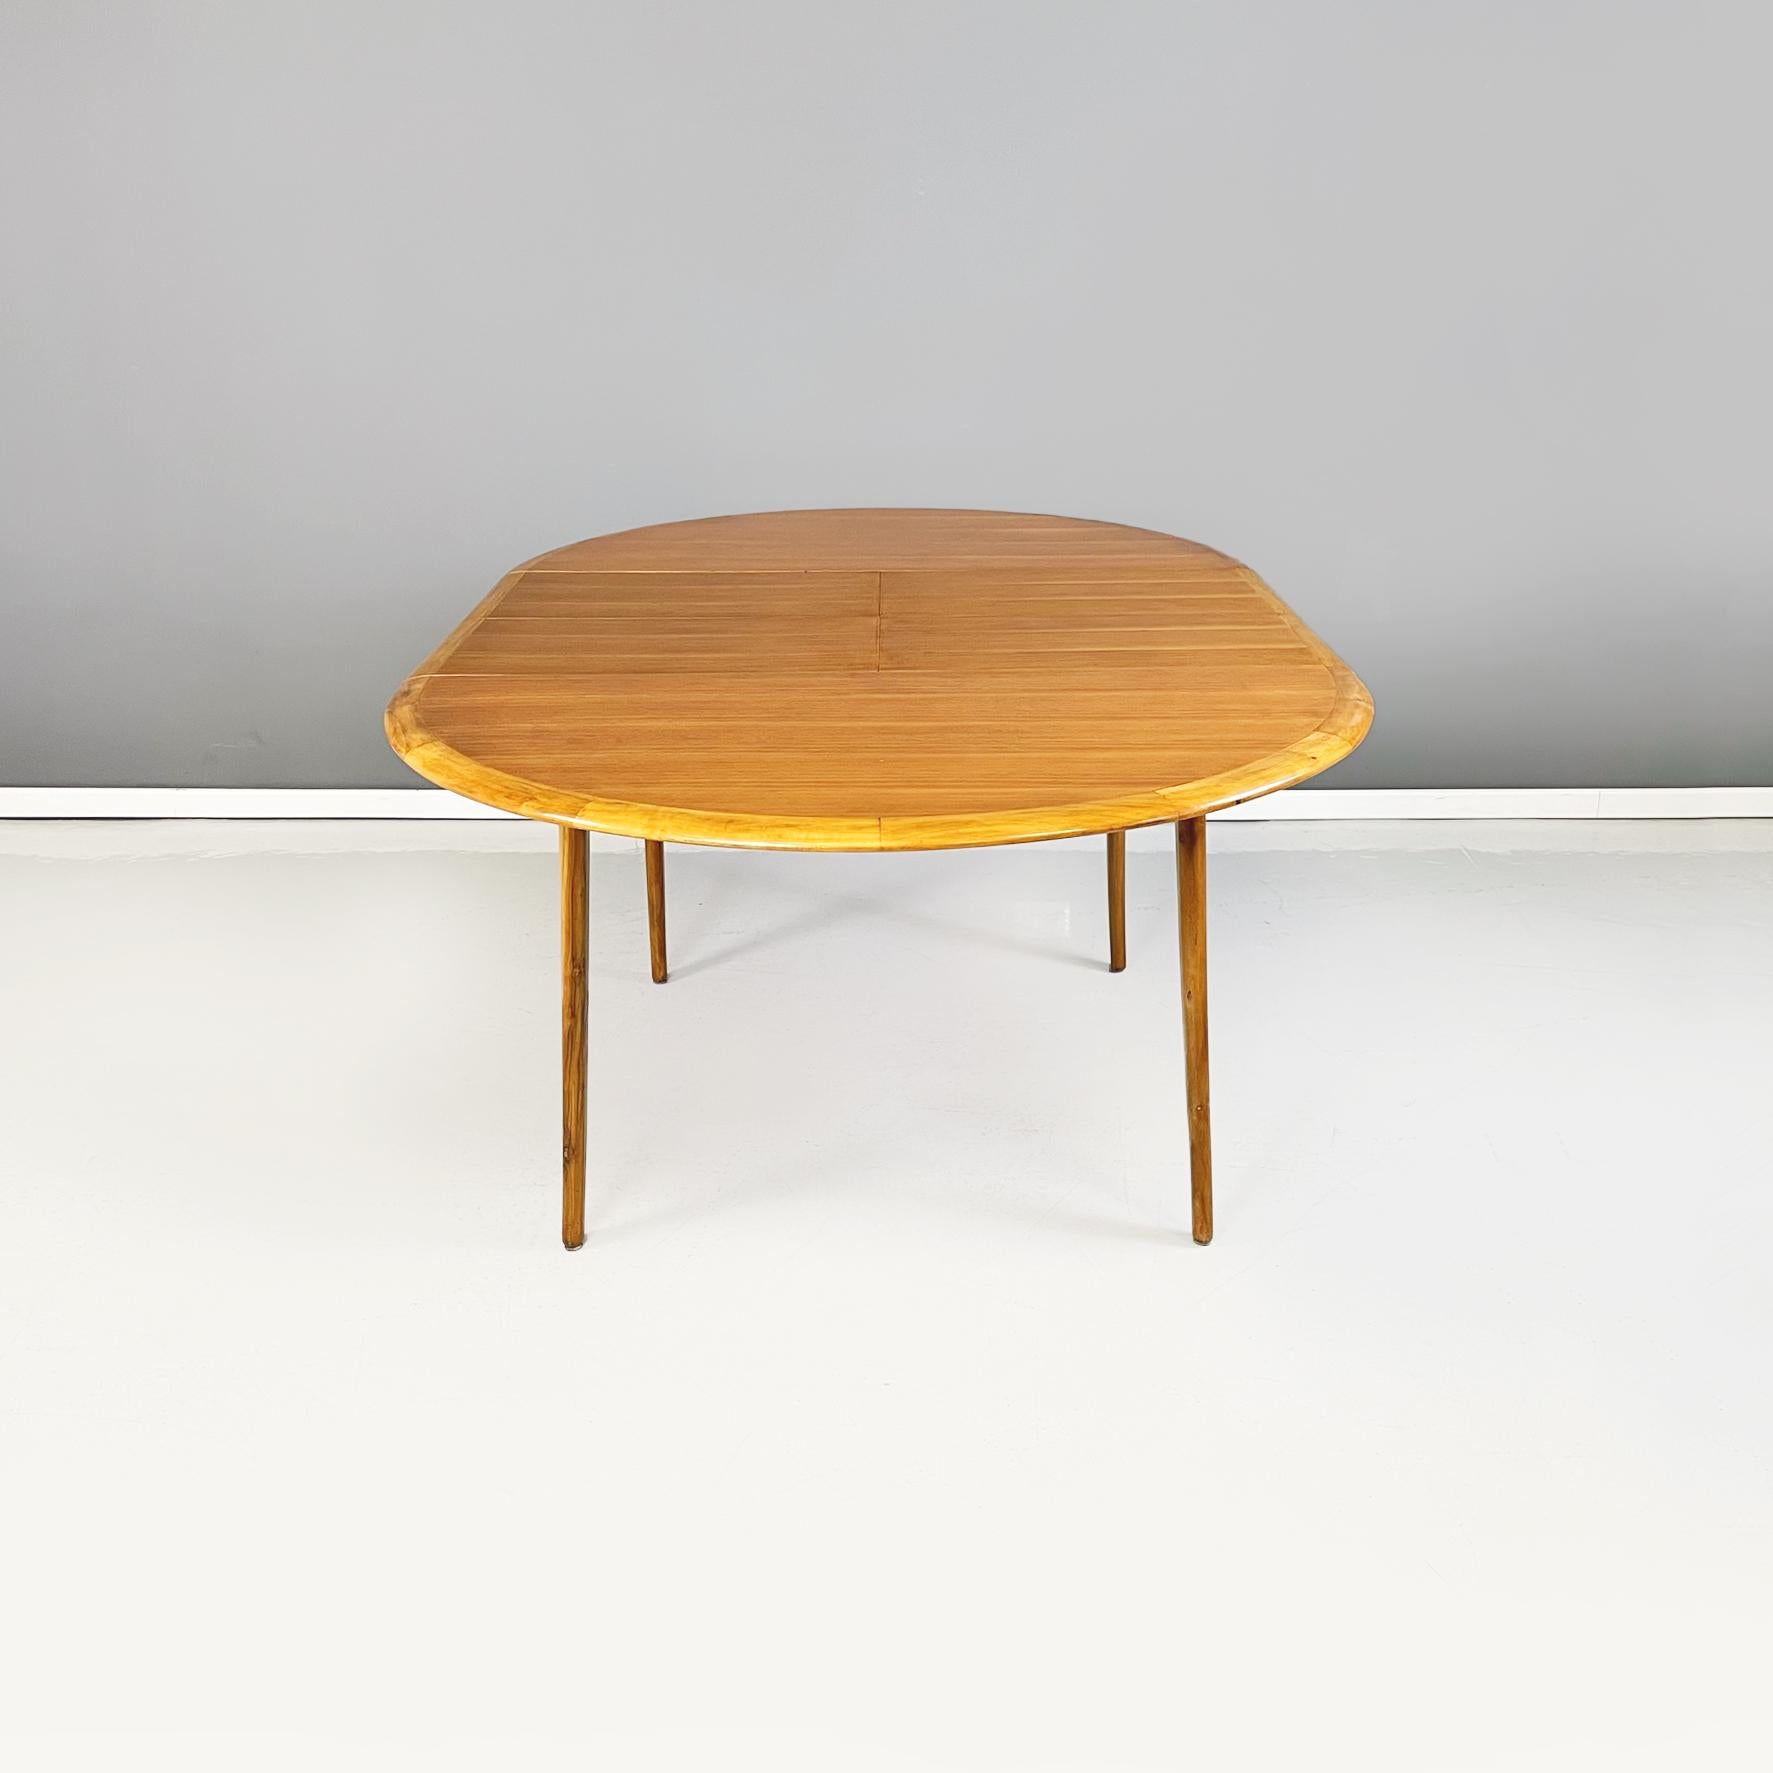 European North Europa Midcentury Oval Round Wooden Dining Table with Extensions, 1960s For Sale